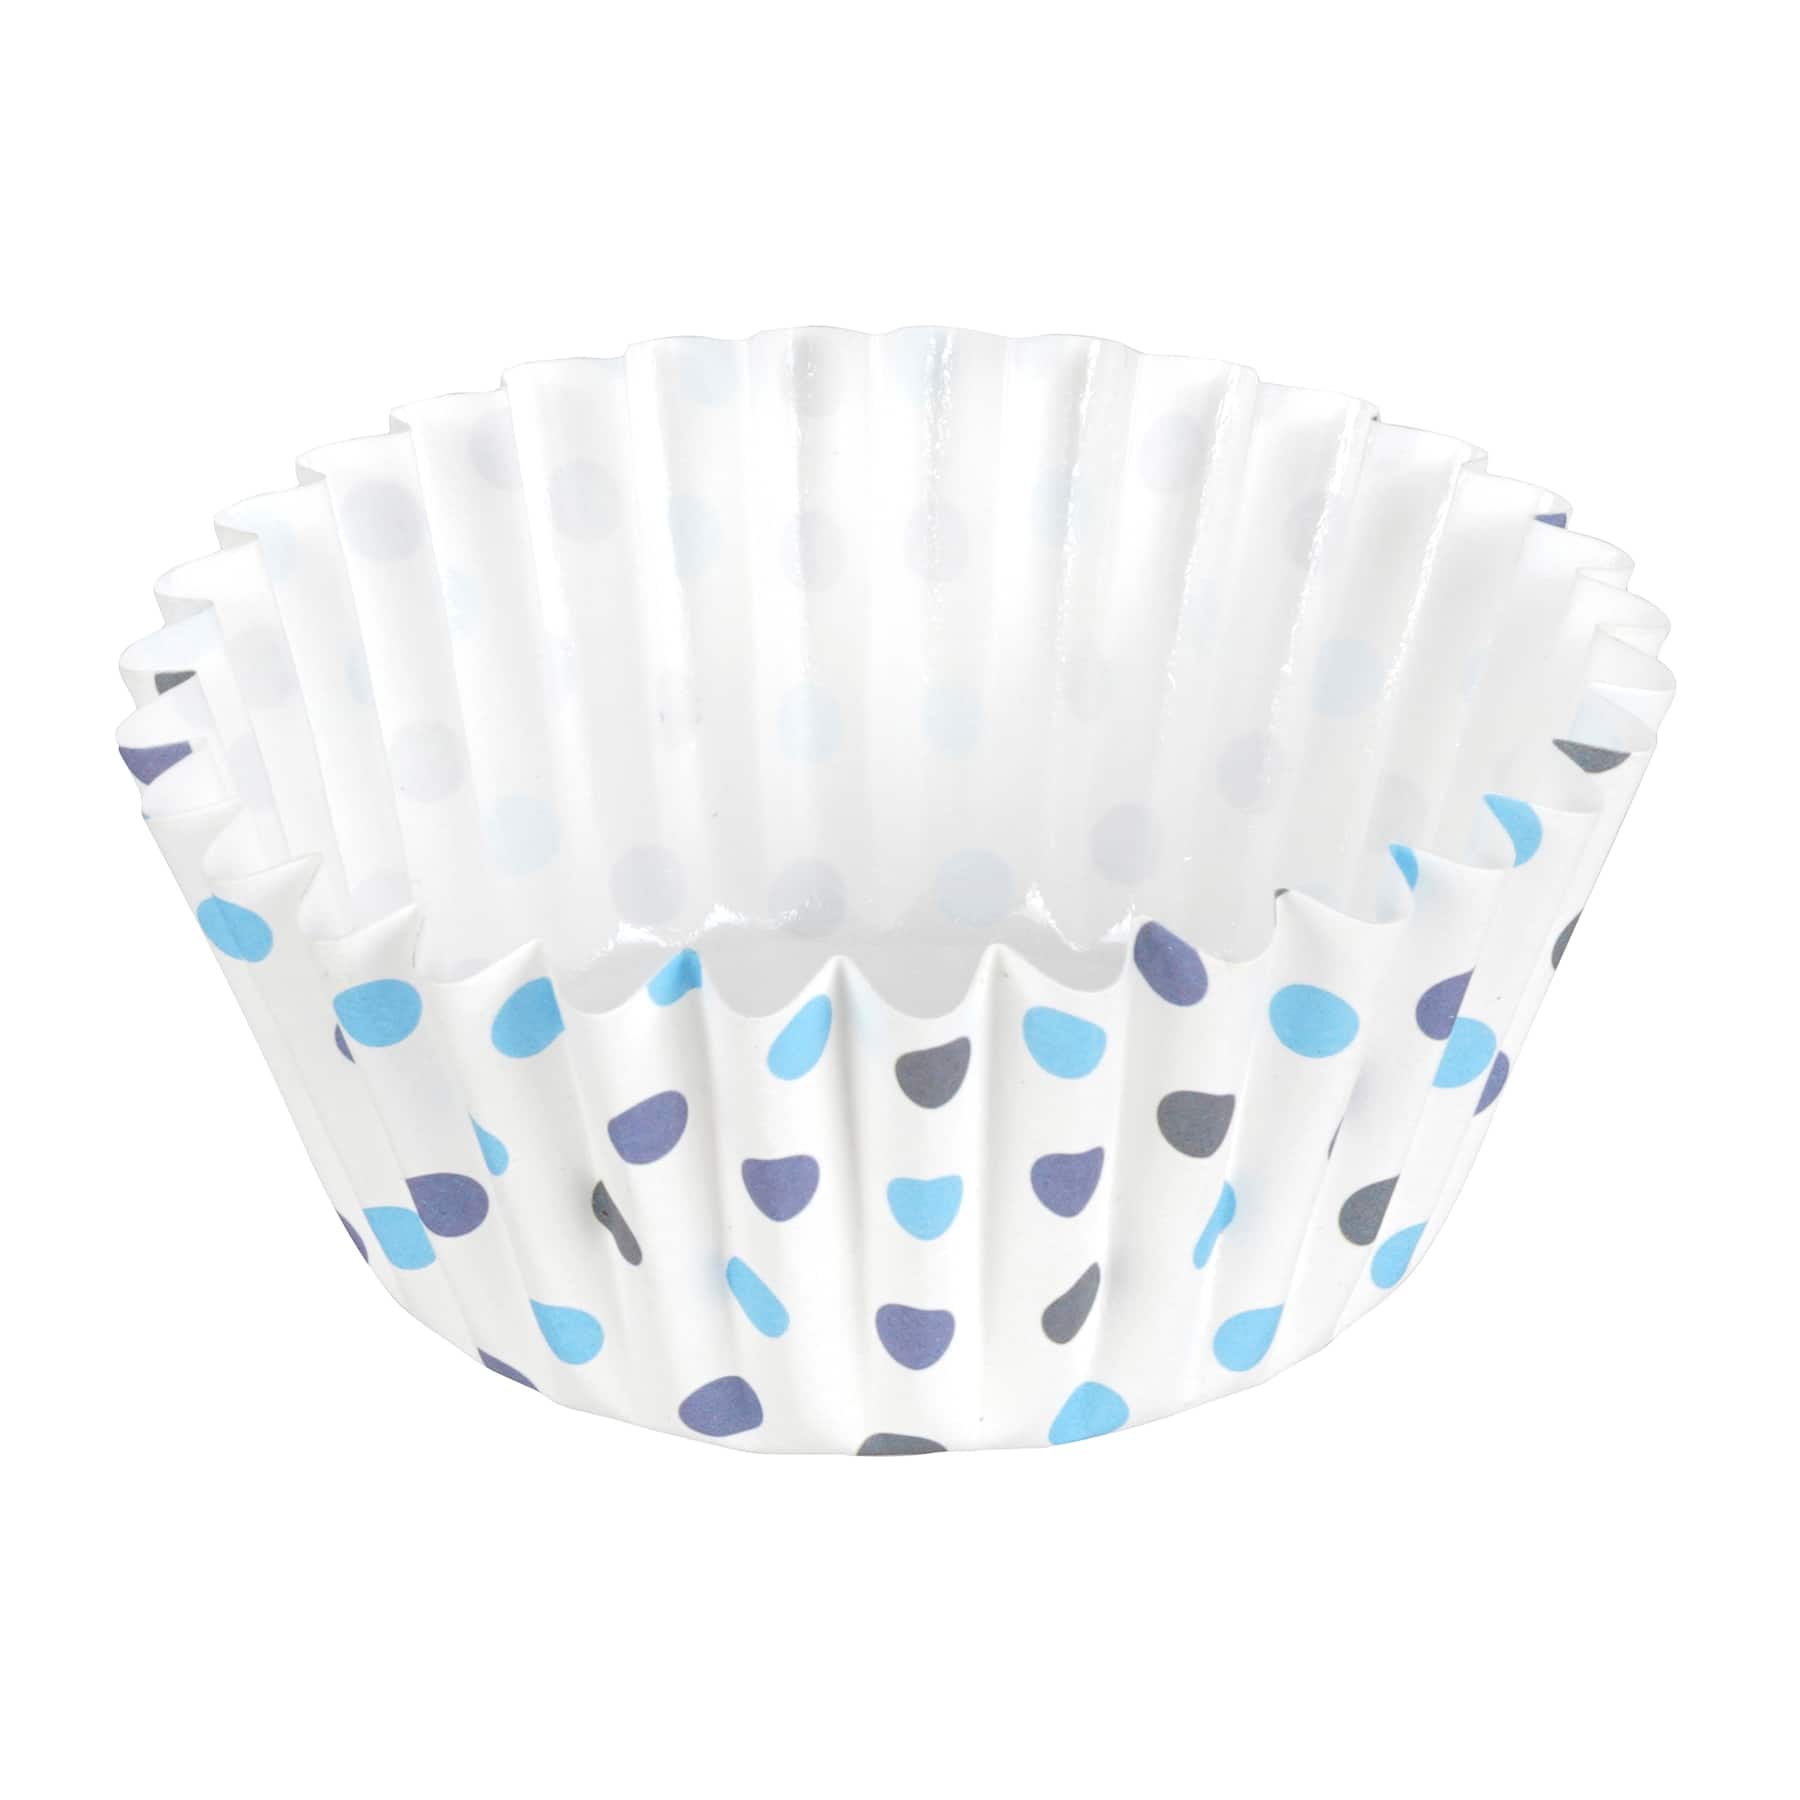 12 Packs: 36 ct. (432 total) Multi Blue Polka Dot Grease Resistant Baking Cups by Celebrate It&#xAE;